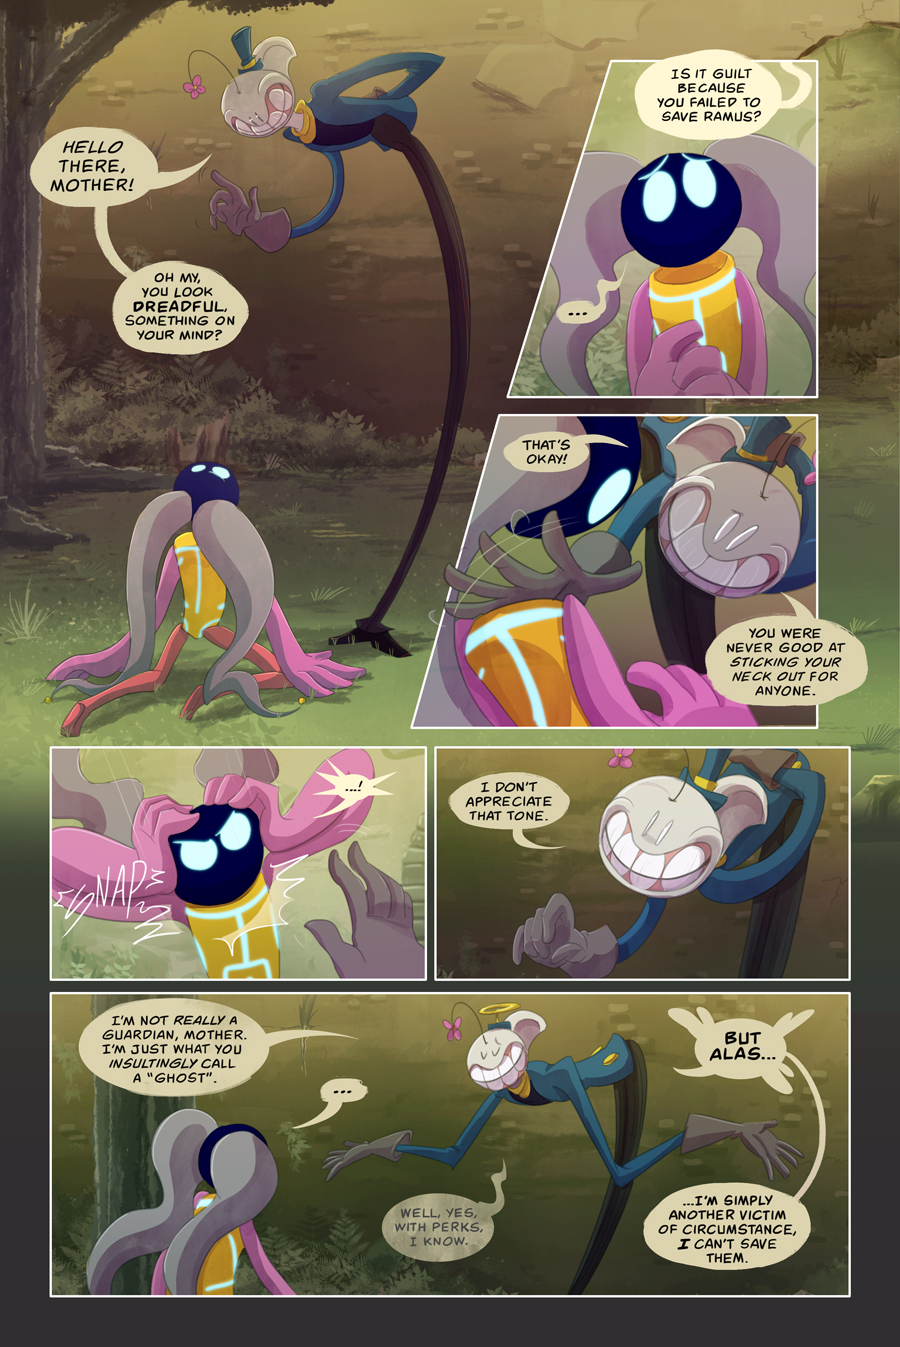 Chapter 5, page 31